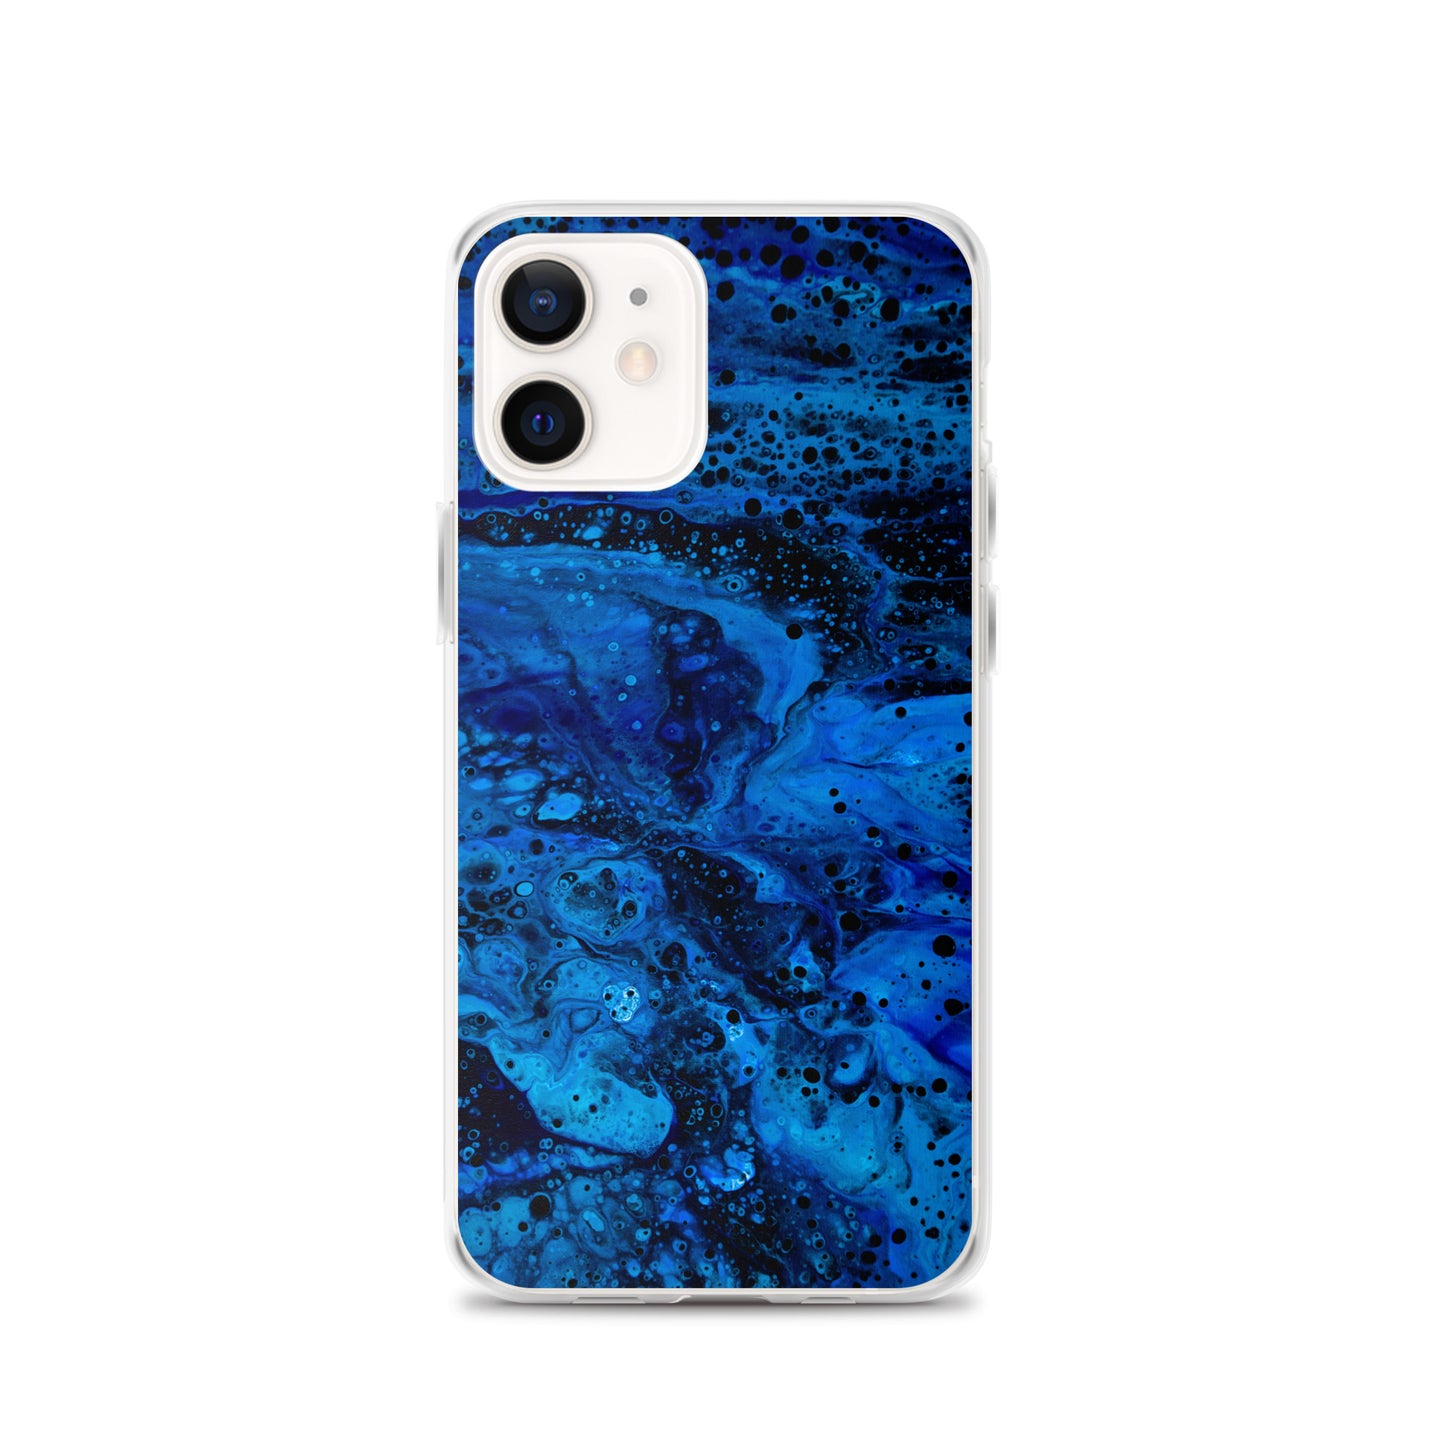 NightOwl Studio Custom Phone Case Compatible with iPhone, Ultra Slim Cover with Heavy Duty Scratch Resistant Shockproof Protection, Blue Abyss